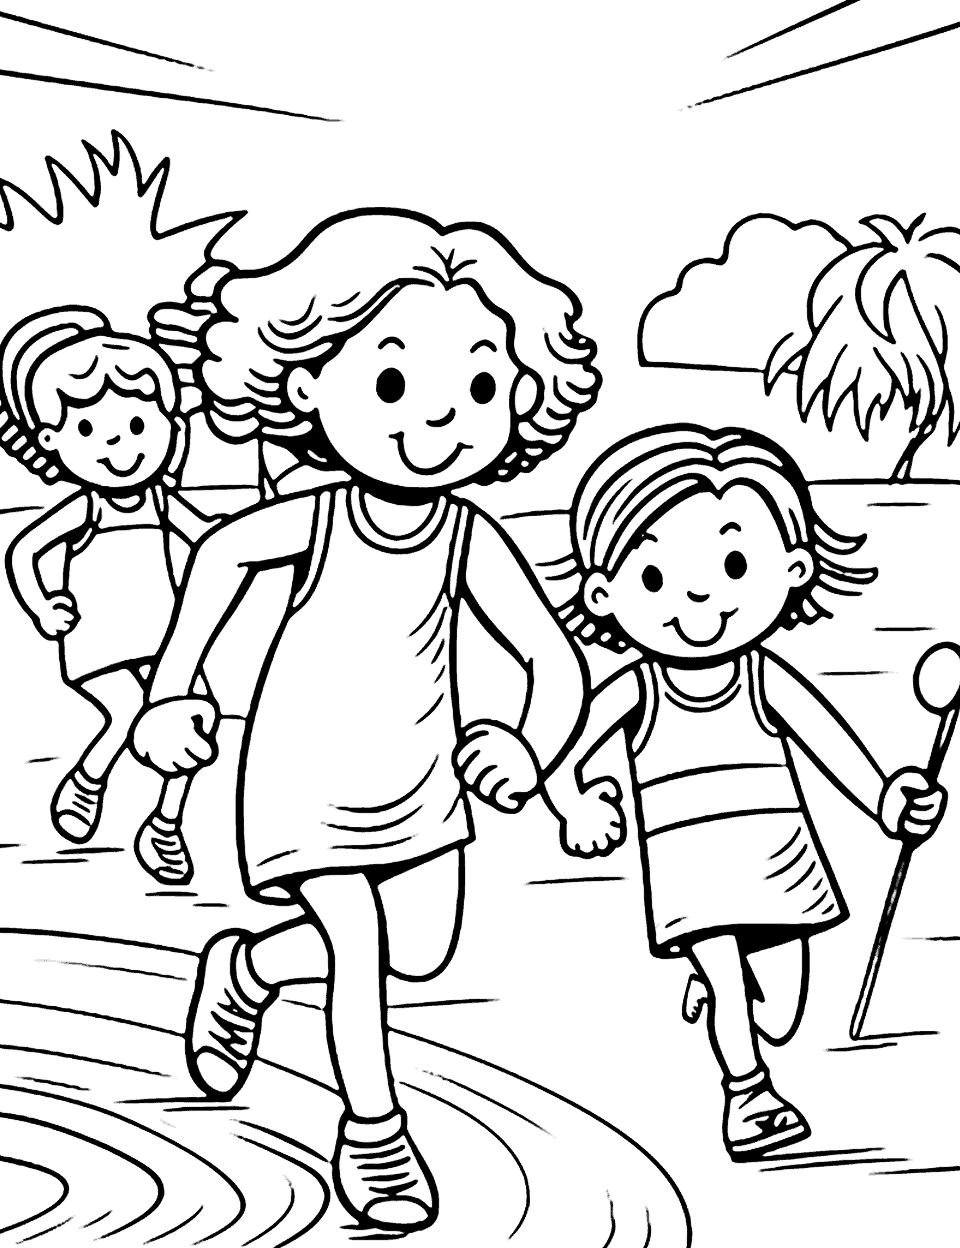 Summer Sports Day Coloring Page - Pre-K kids participating in a fun summer sports day event with races, tug of war, and ball games.